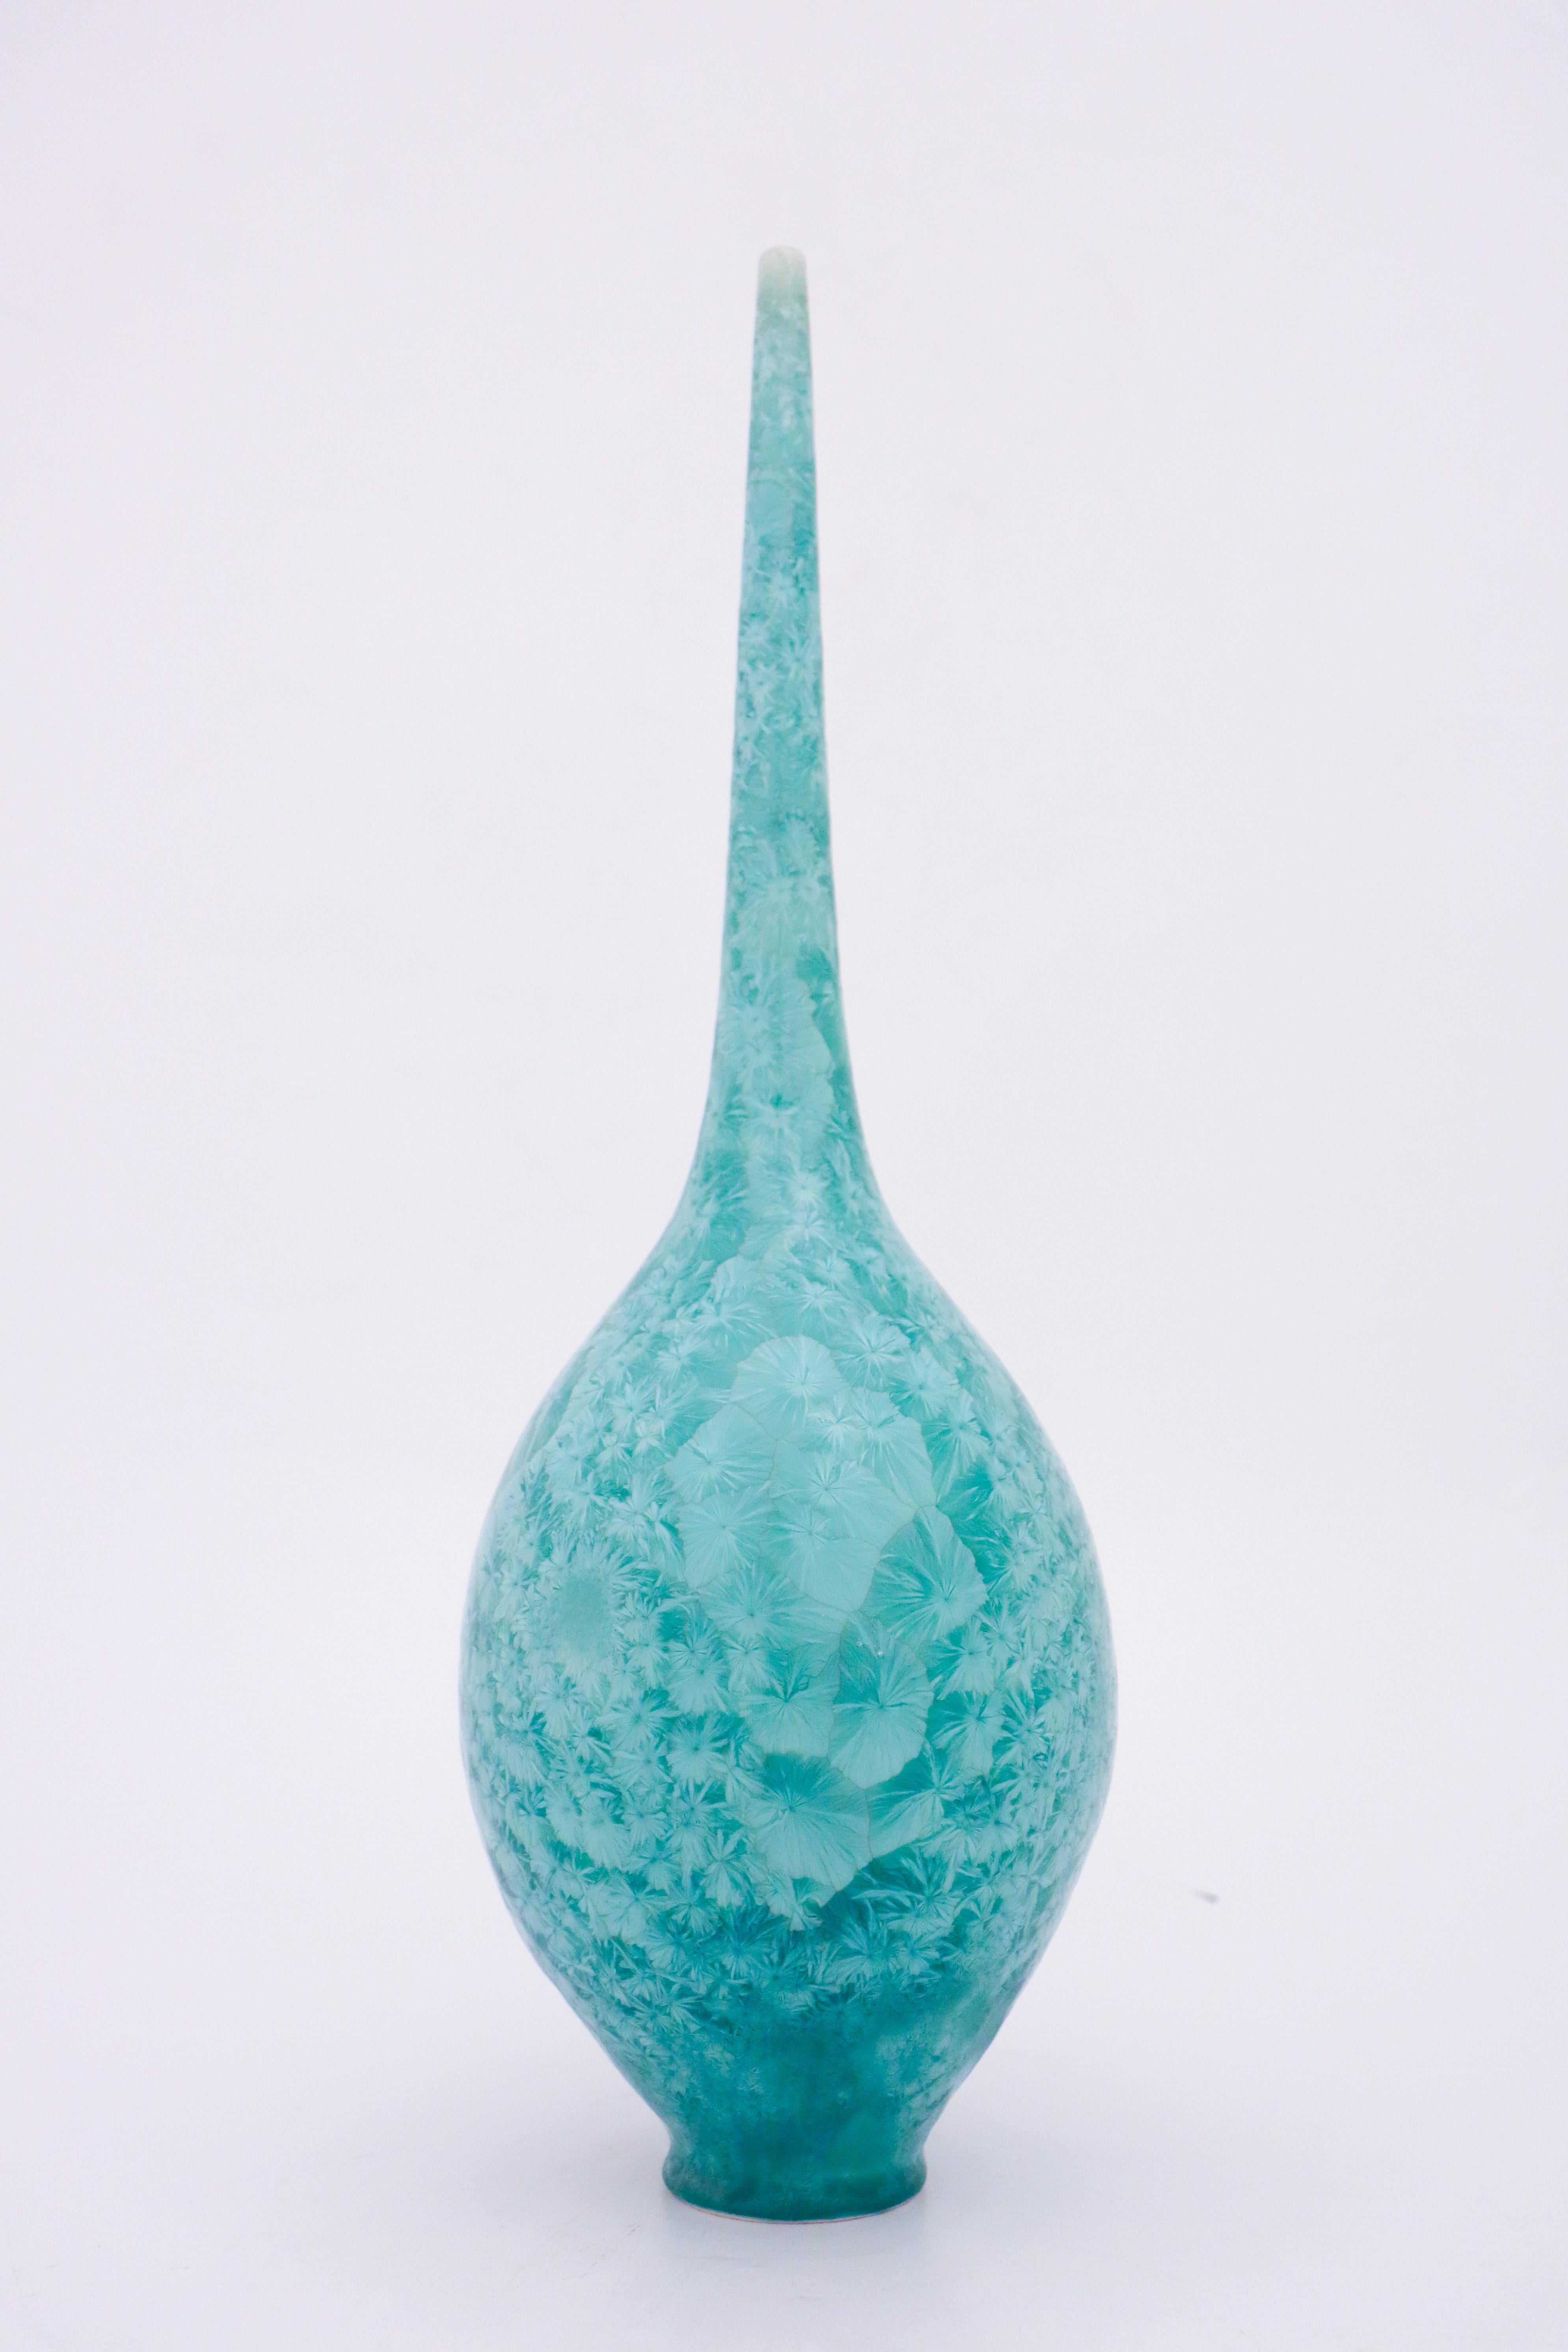 A unique vase in a stunning turquoise crystalline glaze designed by the contemporary Swedish artist Isak Isaksson in his own studio. The vase is 44 cm (17,6